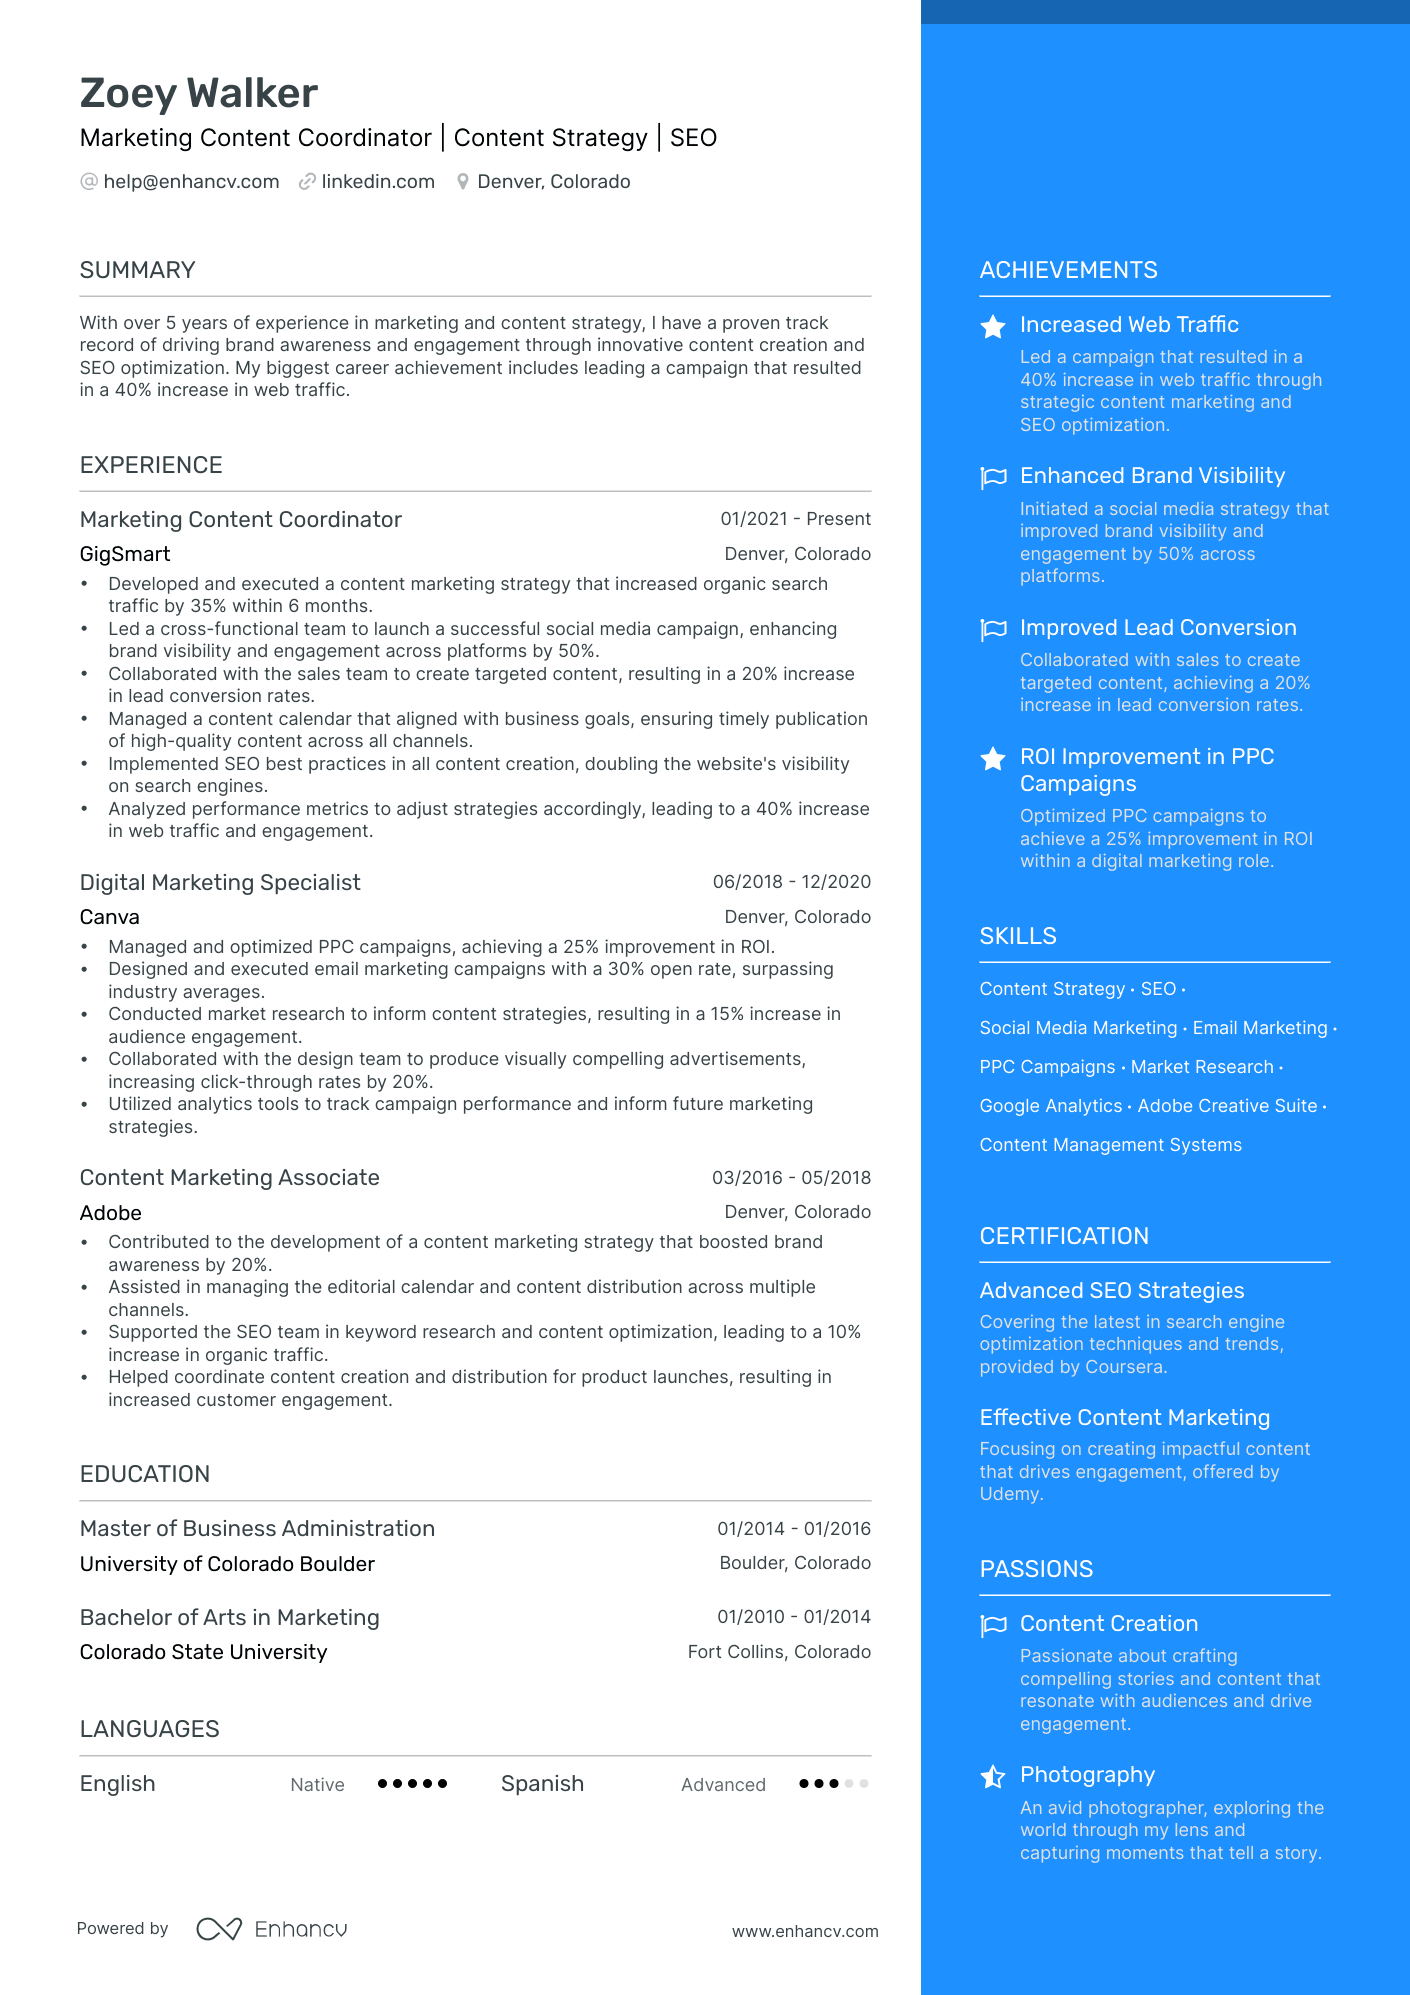 Marketing Content Coordinator | Content Strategy | SEO resume example